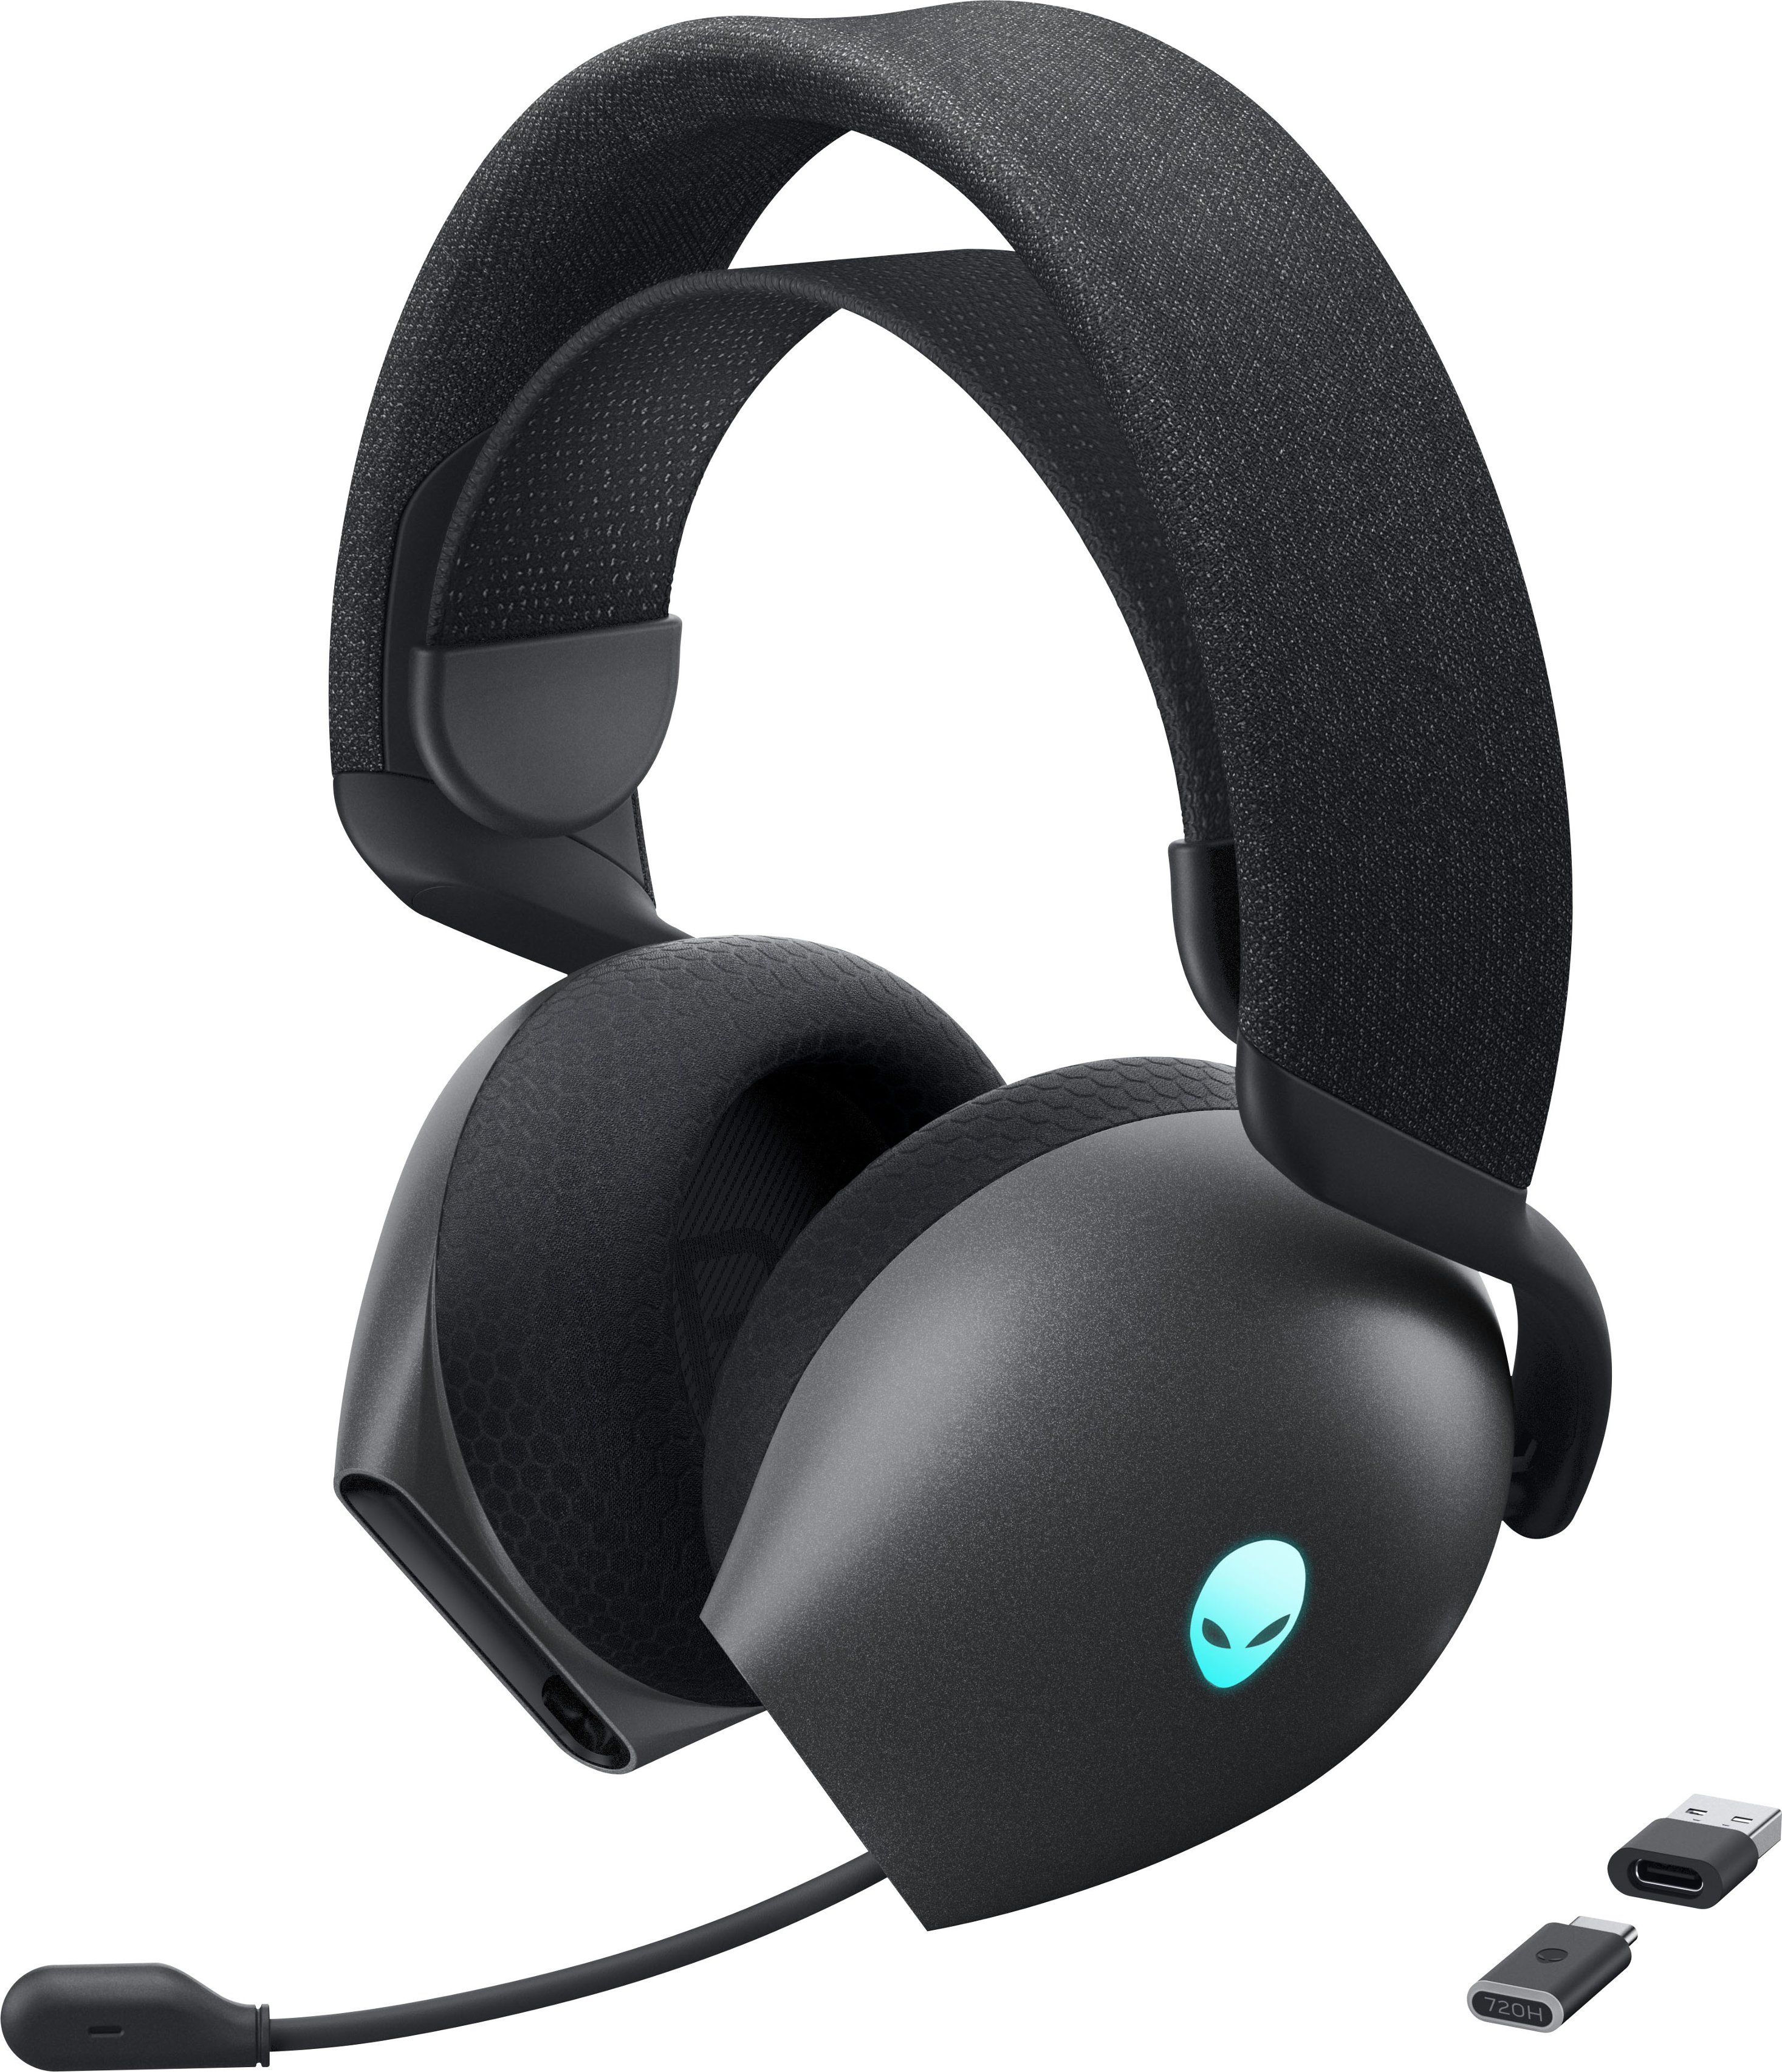 Angle View: RIG - 800 Pro HS Wireless Headset and Base Station for PS4|PS5 - Black